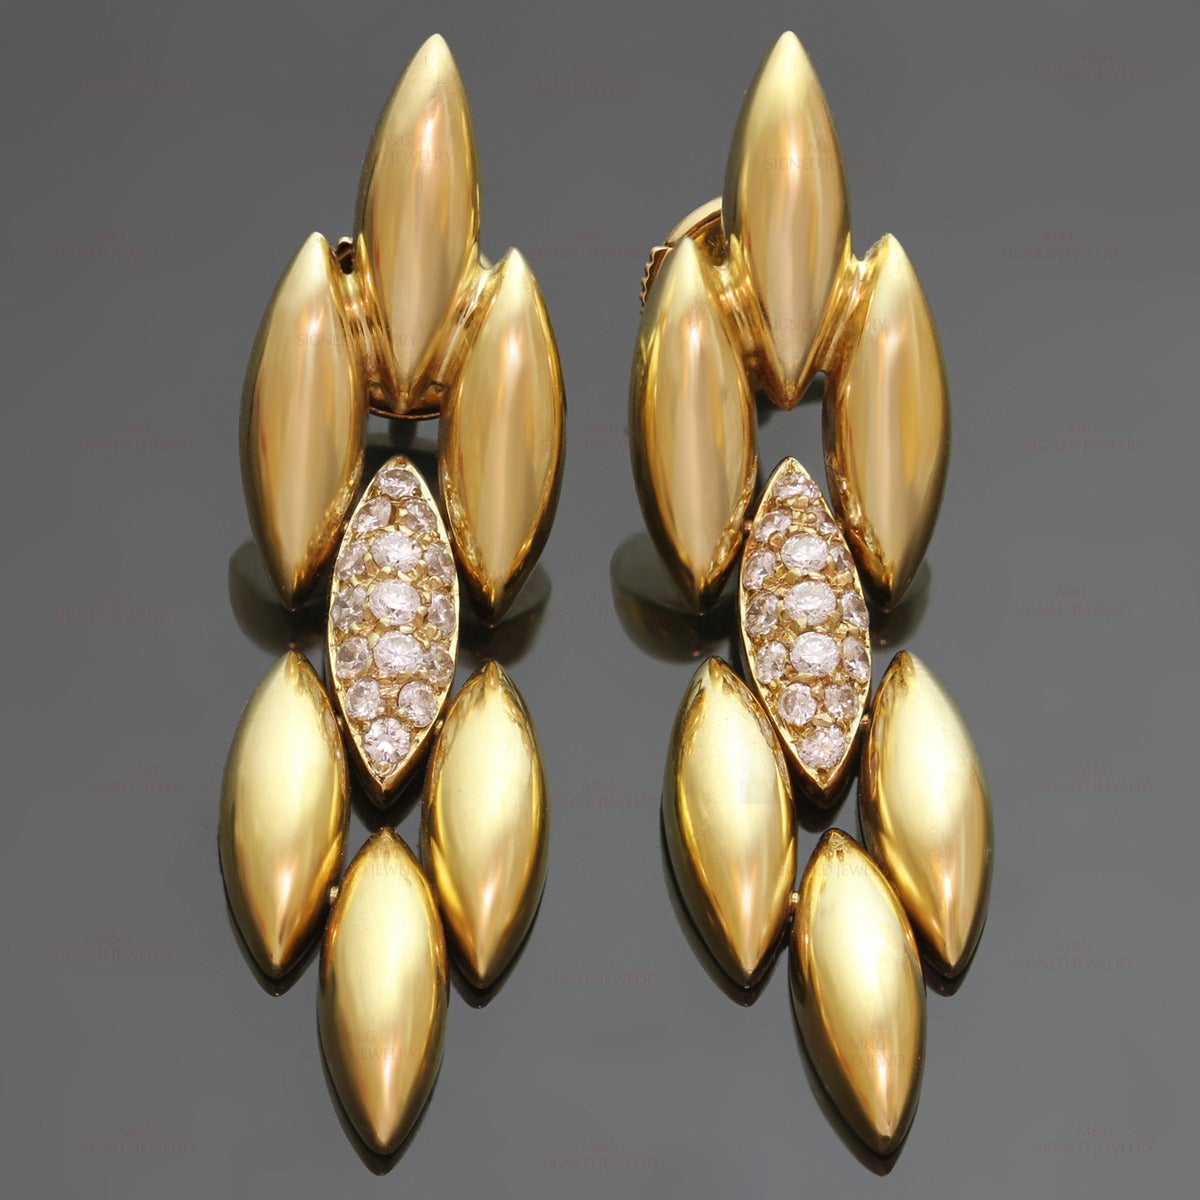 These chic earrings from the iconic Gentiane collection features a fluid almond shape link design made in 18k yellow gold and set with 30 brilliant-cut round E-F VVS1-VVS2 diamonds of an estimated 0.75 carats. Made in France circa 1980s.